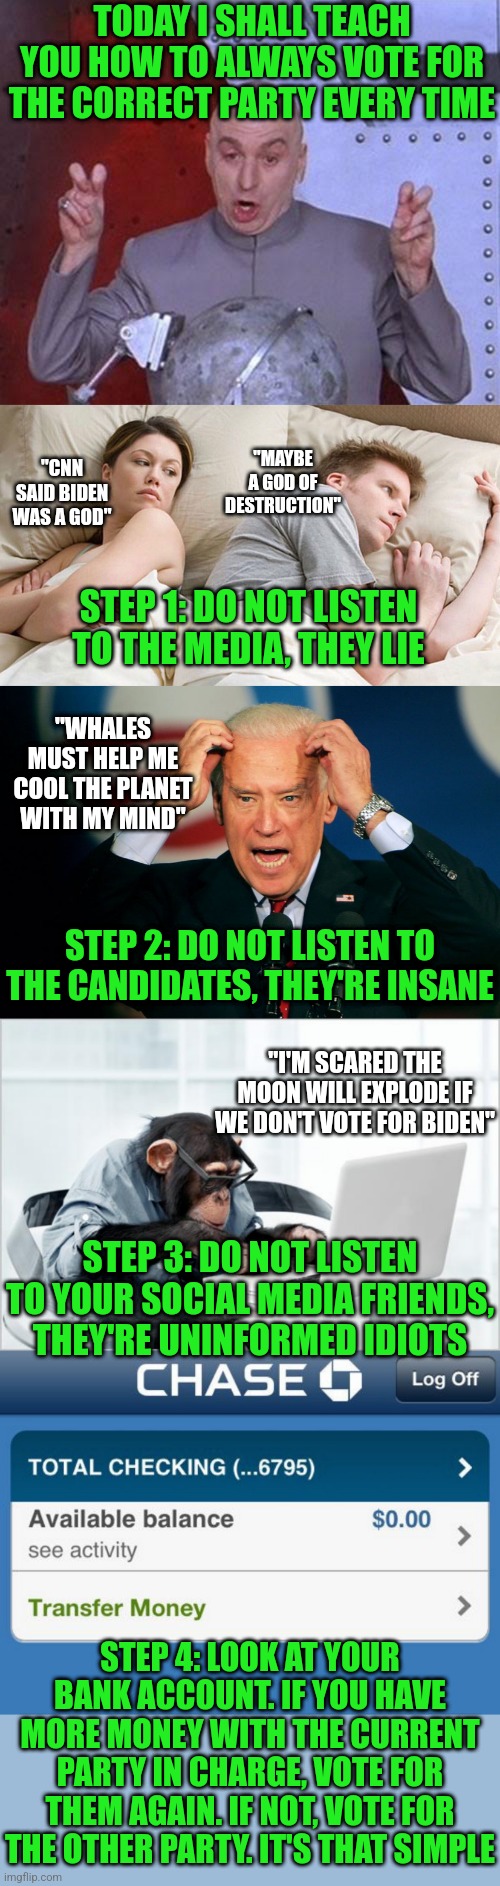 If you don't start voting with your wallets, soon you won't have enough money to put anything in your wallet |  TODAY I SHALL TEACH YOU HOW TO ALWAYS VOTE FOR THE CORRECT PARTY EVERY TIME; "MAYBE A GOD OF DESTRUCTION"; "CNN SAID BIDEN WAS A GOD"; STEP 1: DO NOT LISTEN TO THE MEDIA, THEY LIE; "WHALES MUST HELP ME COOL THE PLANET WITH MY MIND"; STEP 2: DO NOT LISTEN TO THE CANDIDATES, THEY'RE INSANE; "I'M SCARED THE MOON WILL EXPLODE IF WE DON'T VOTE FOR BIDEN"; STEP 3: DO NOT LISTEN TO YOUR SOCIAL MEDIA FRIENDS, THEY'RE UNINFORMED IDIOTS; STEP 4: LOOK AT YOUR BANK ACCOUNT. IF YOU HAVE MORE MONEY WITH THE CURRENT PARTY IN CHARGE, VOTE FOR THEM AGAIN. IF NOT, VOTE FOR THE OTHER PARTY. IT'S THAT SIMPLE | image tagged in dr evil laser,couple in bed,joe biden,monkey-laptop,low bank account,voting | made w/ Imgflip meme maker